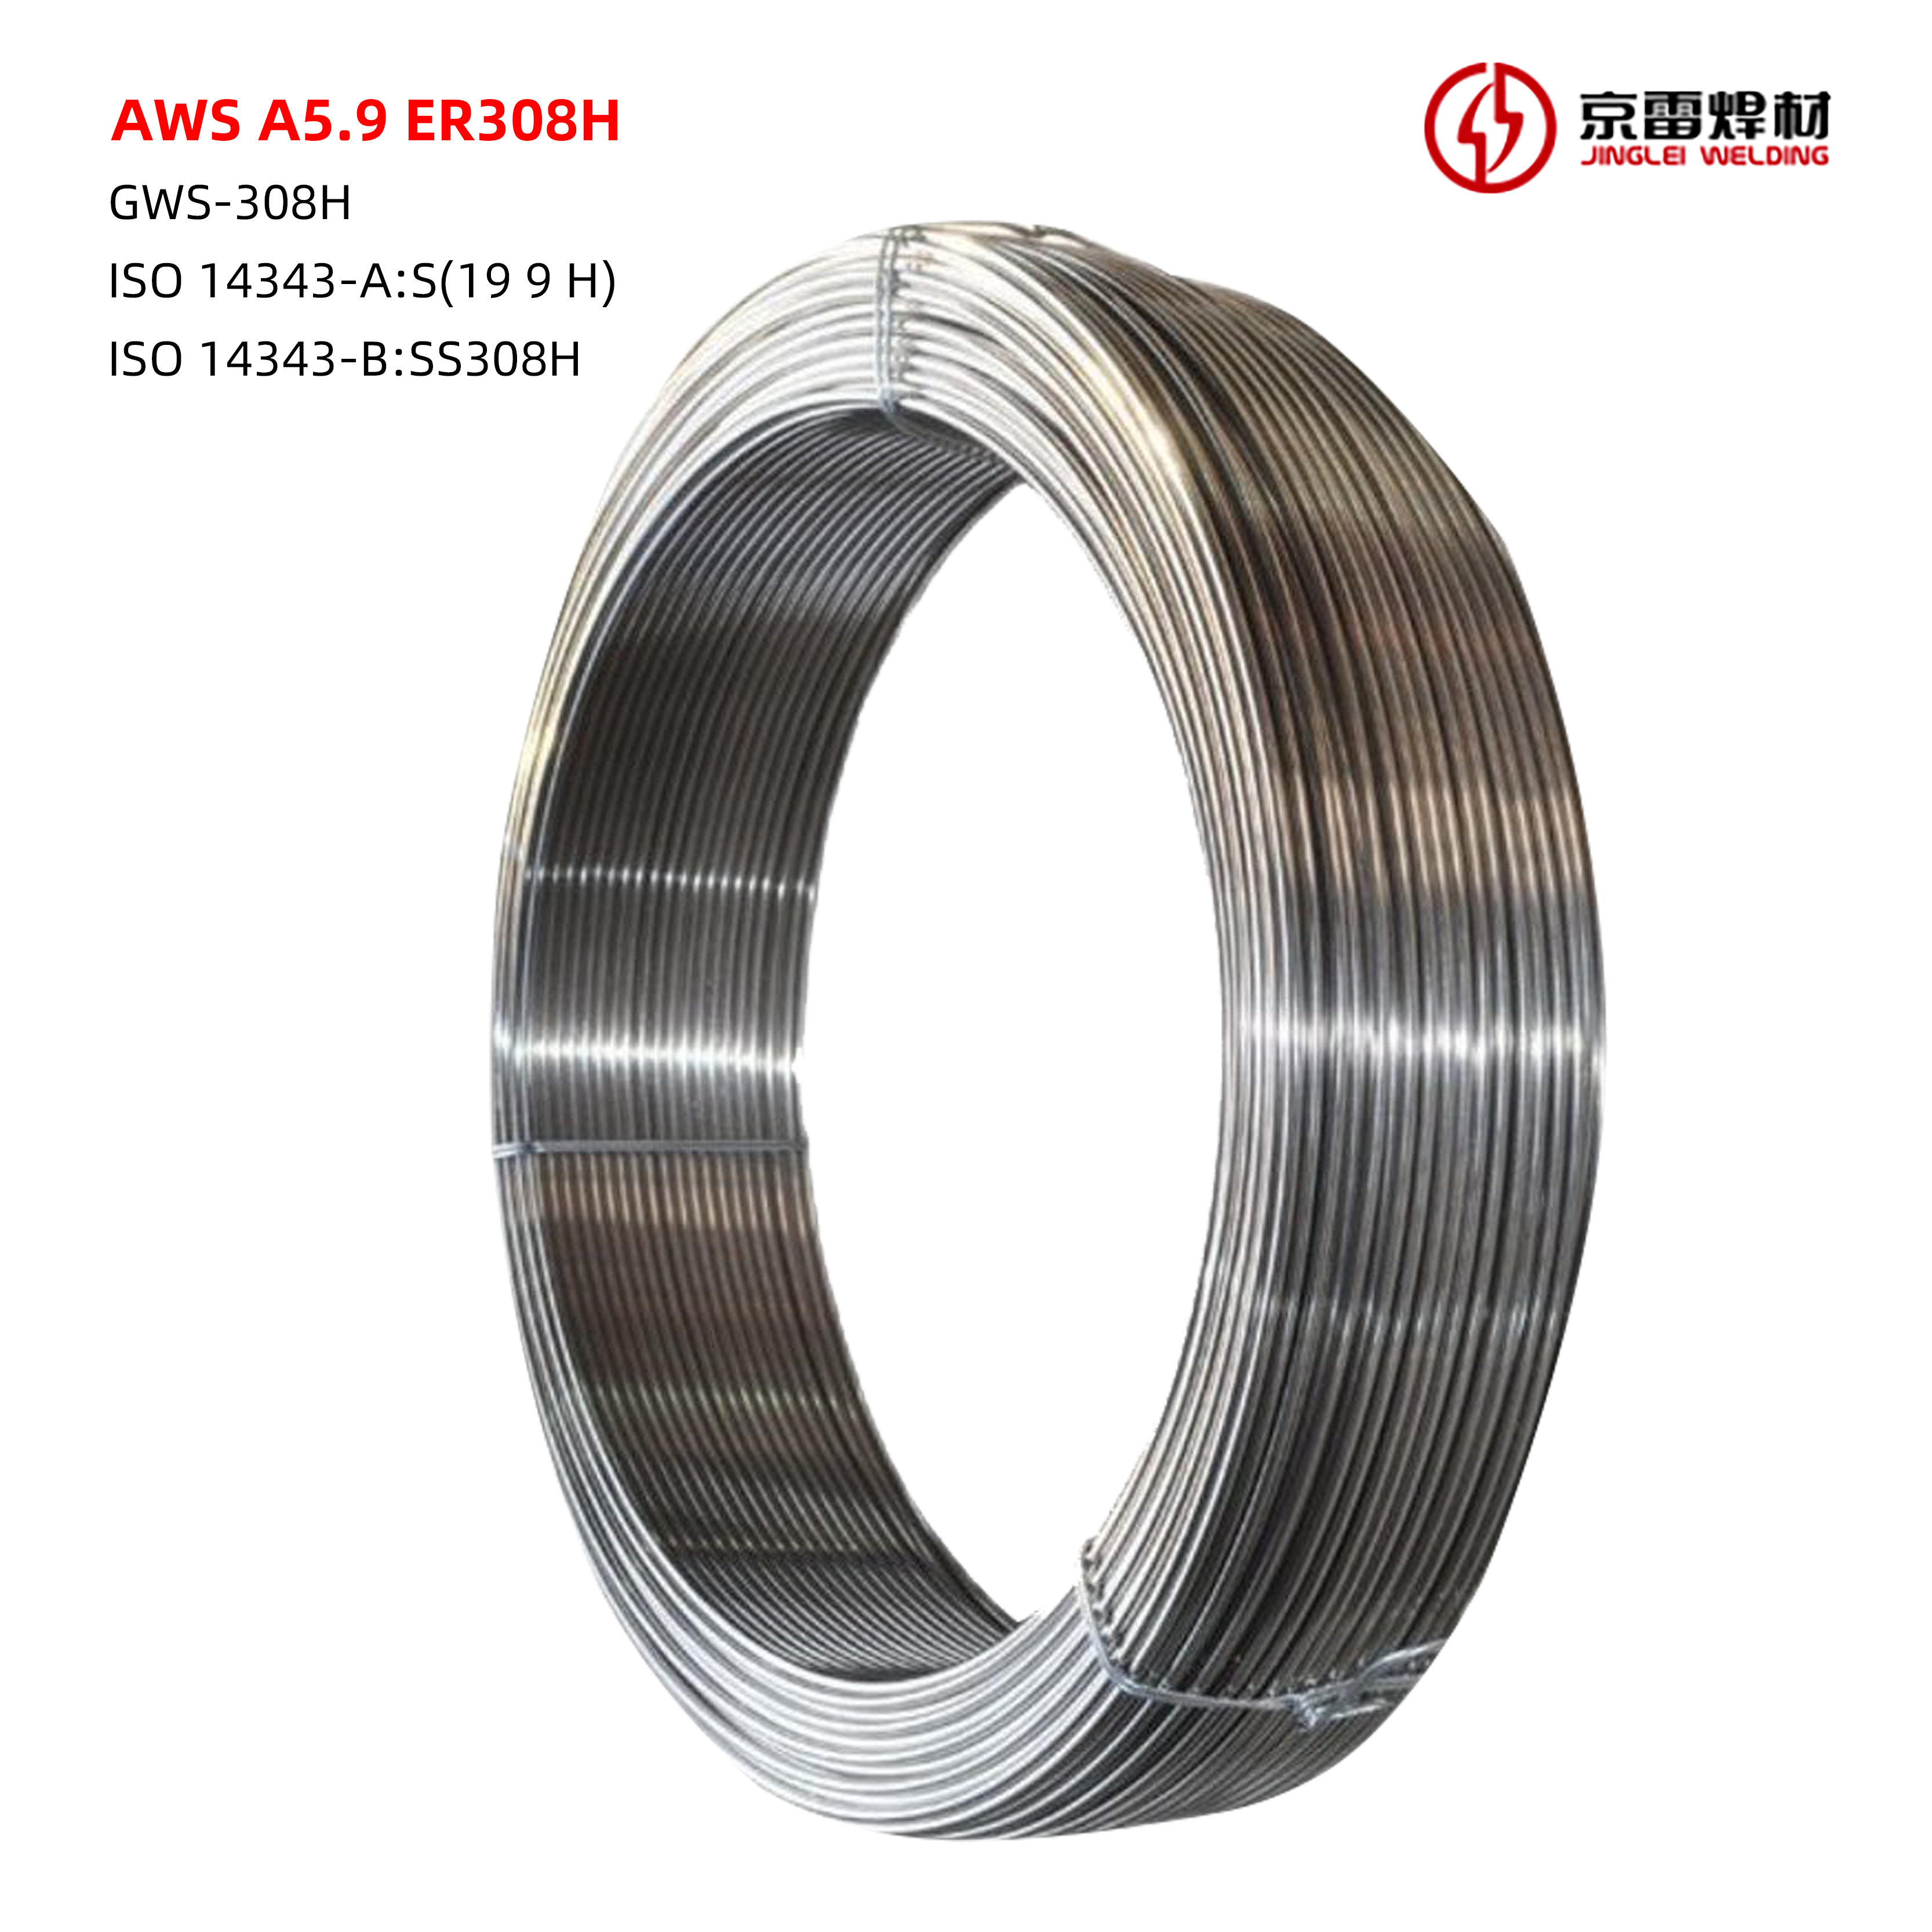 Stainless steels SAW welding wire ER308H and flux Welding accessories